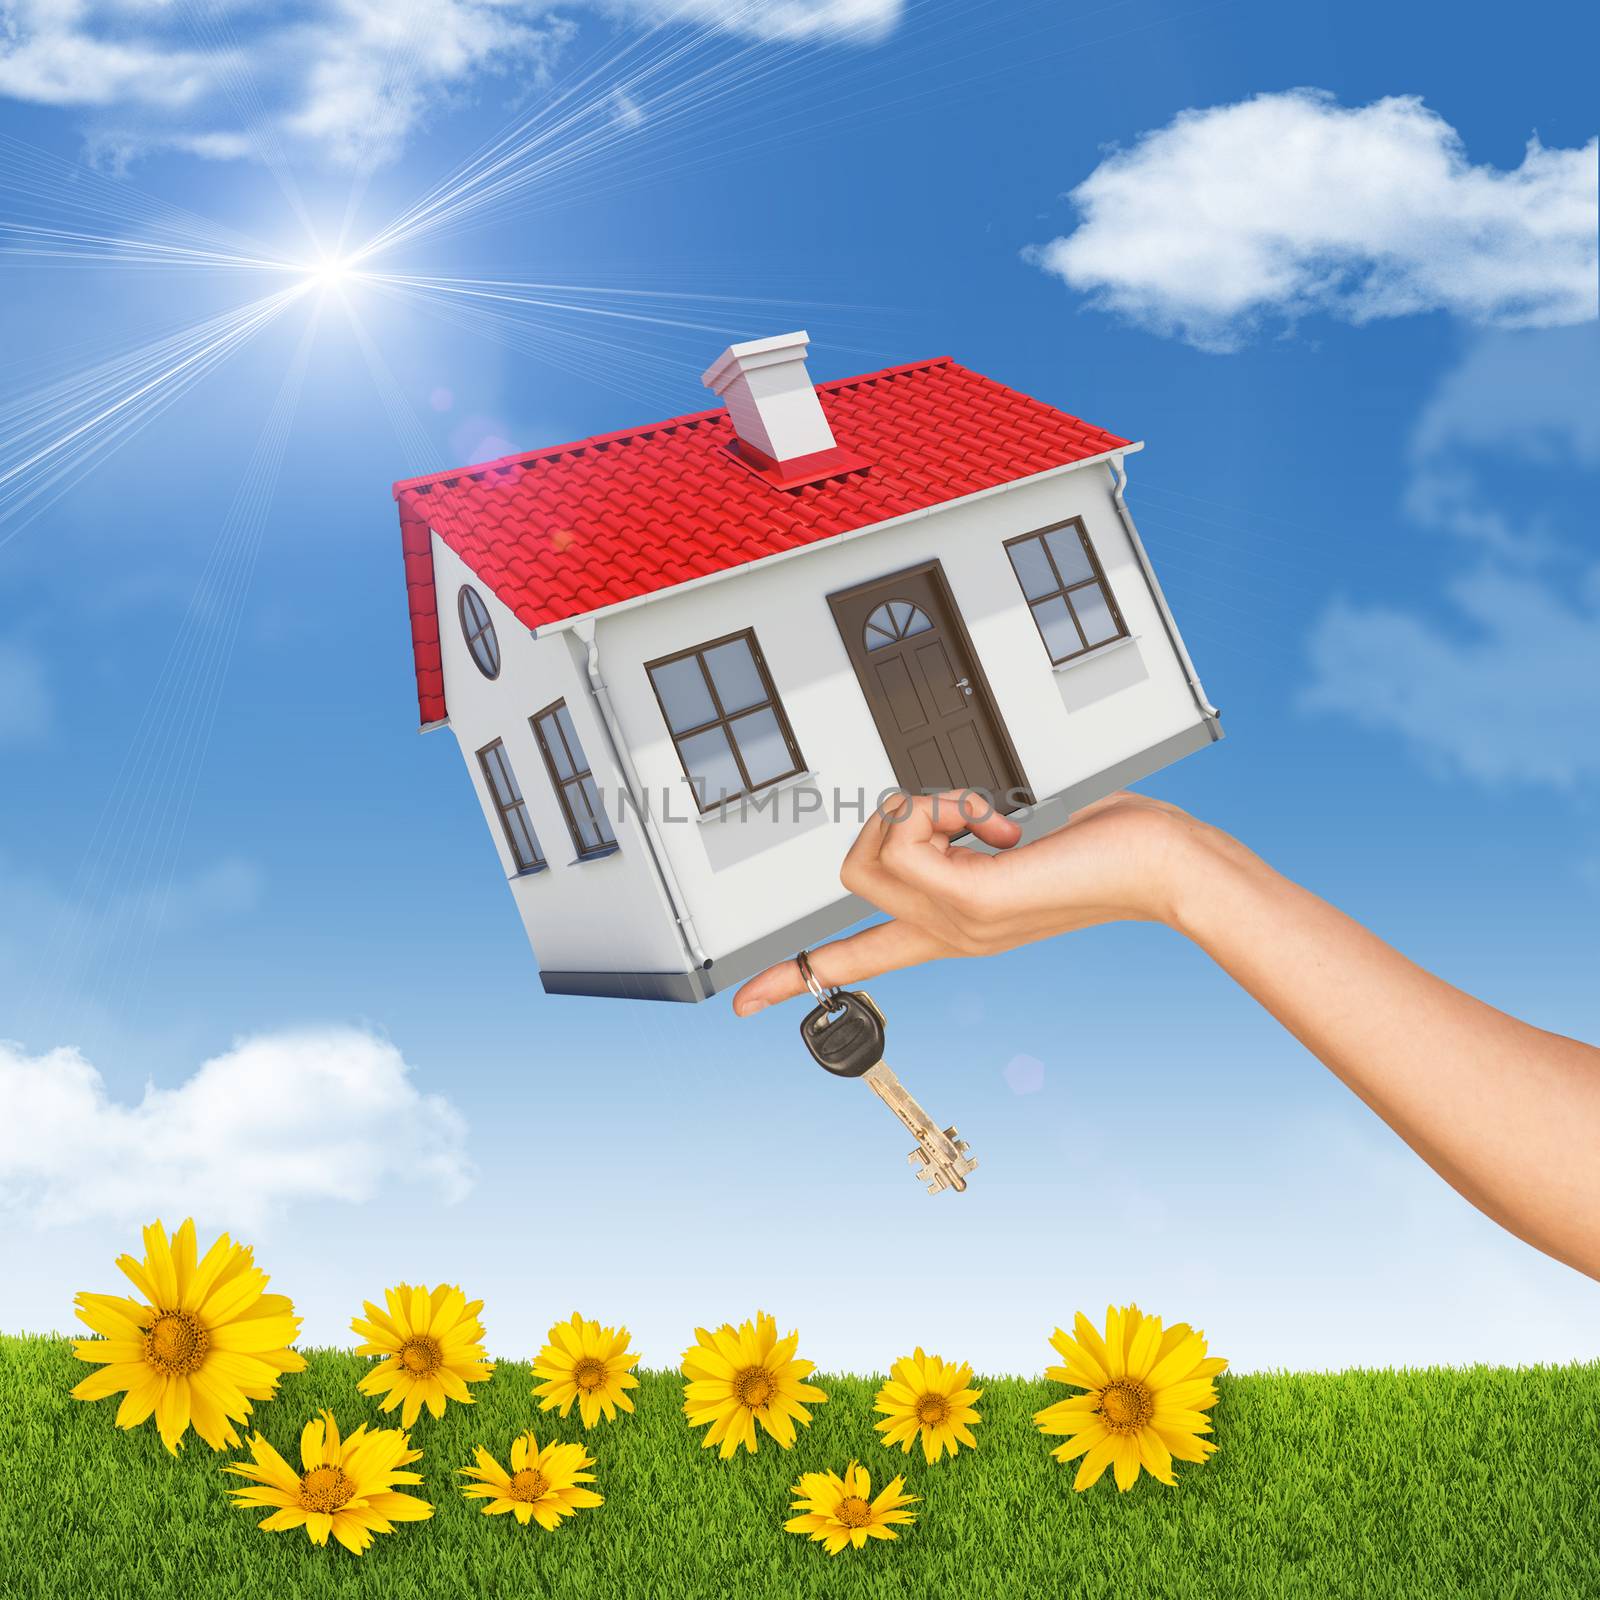 House and keys in womans hand on nature background with blue sky and yellow flowers